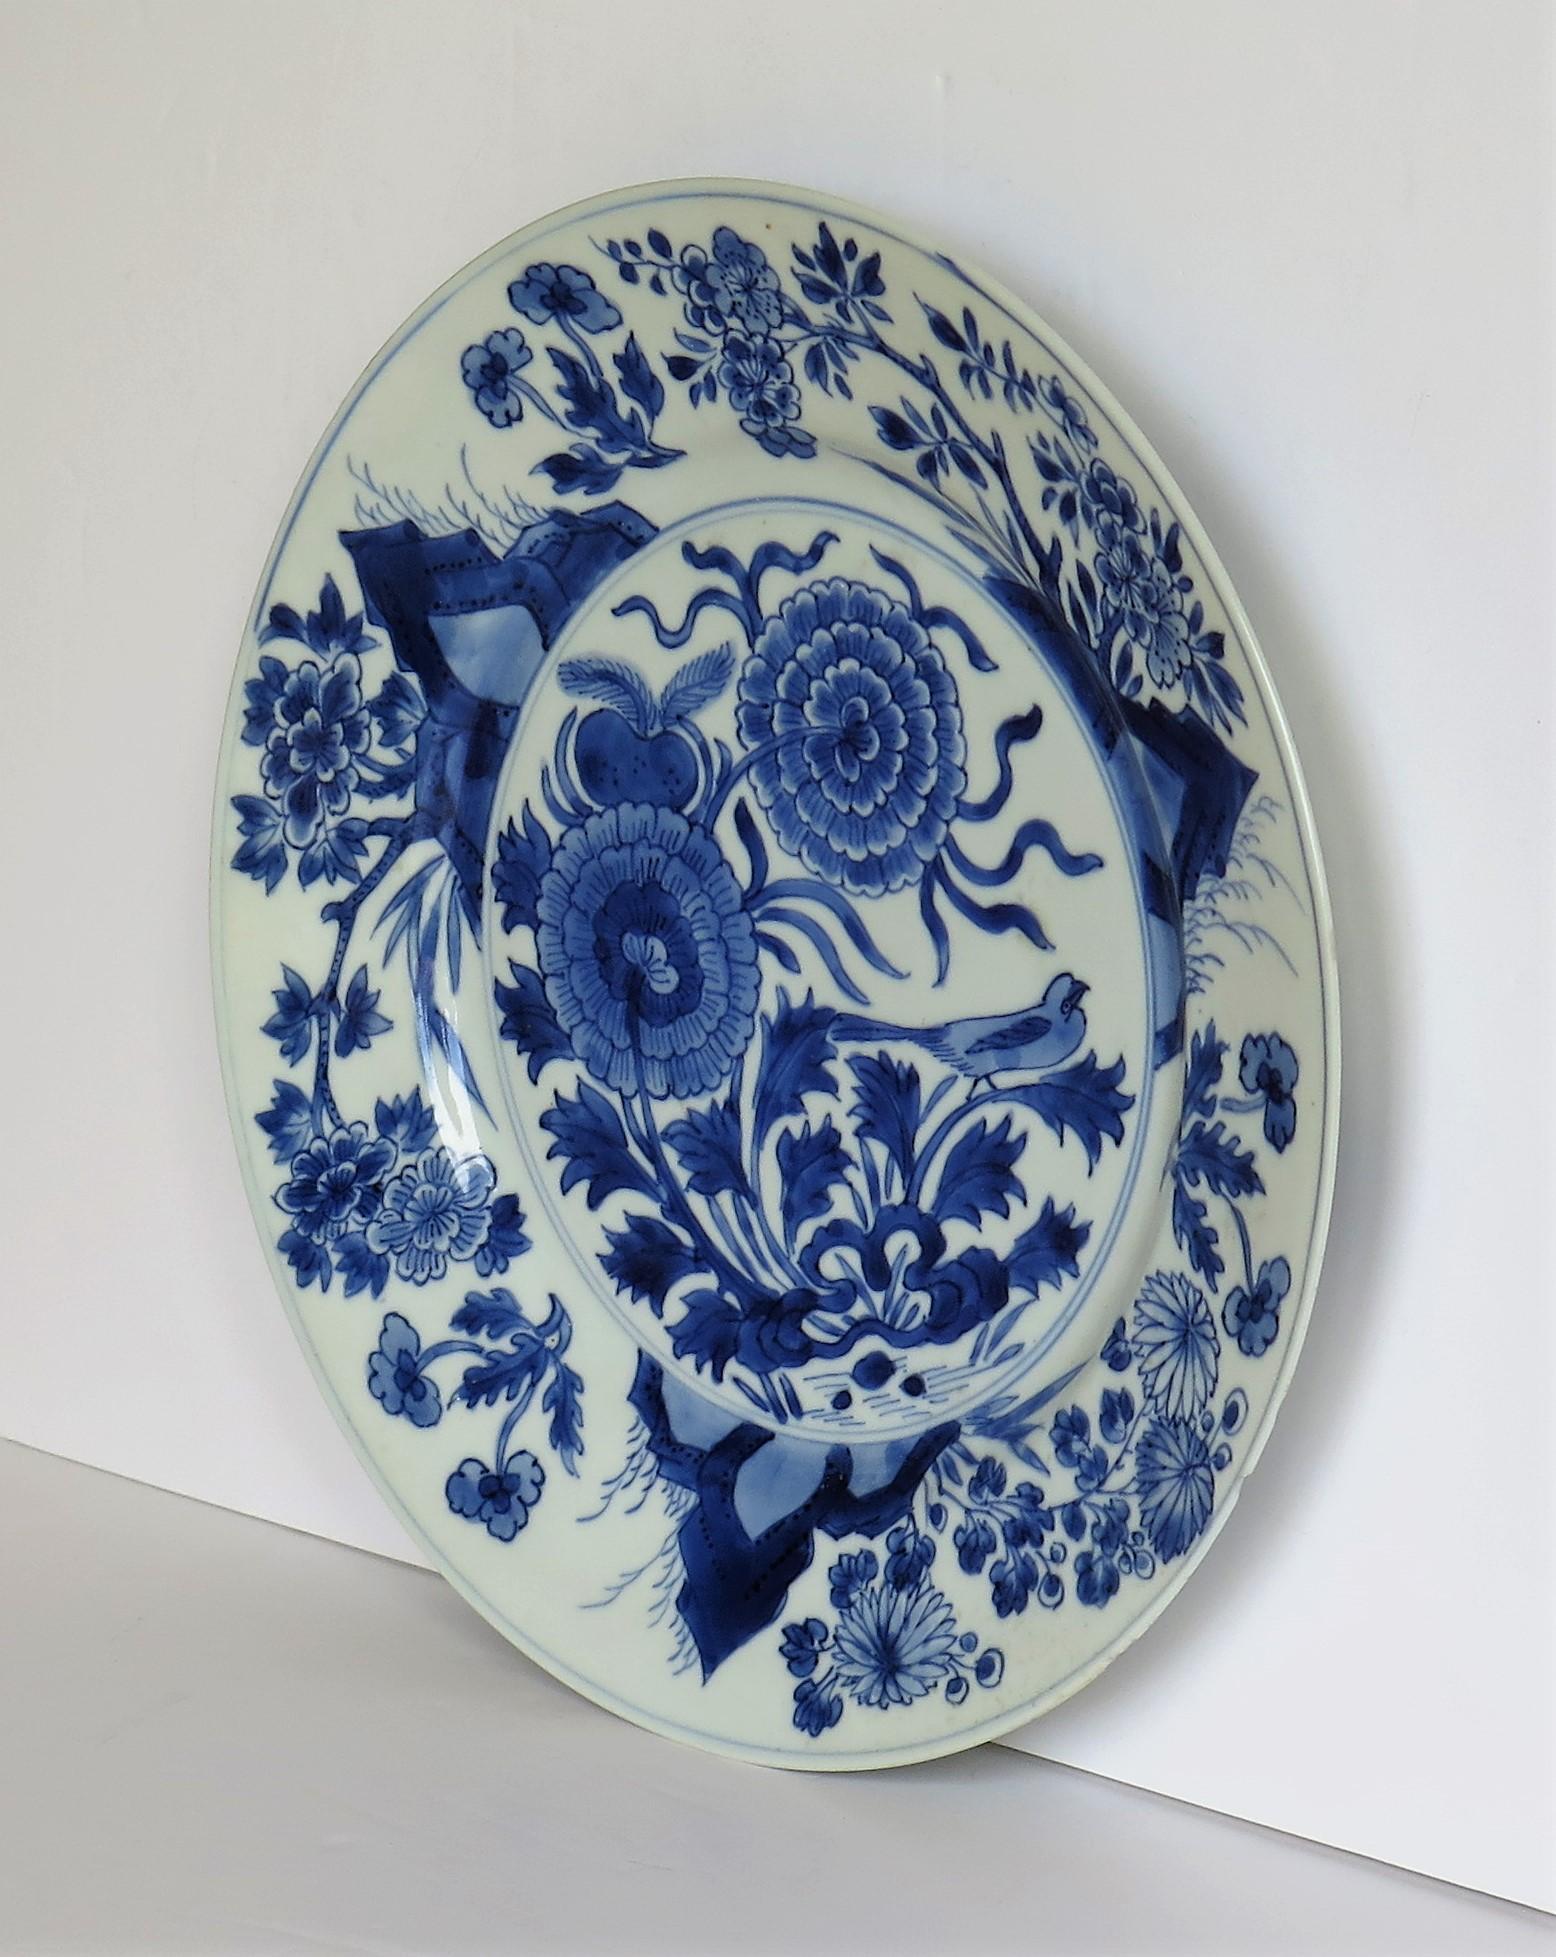 This is a beautifully hand painted Chinese porcelain blue and white plate from the Qing, Kangxi period, 1662-1722.

The plate is finely potted with a carefully cut base rim and a lovely rich glassy white glaze, with a very light blue tinge.

The